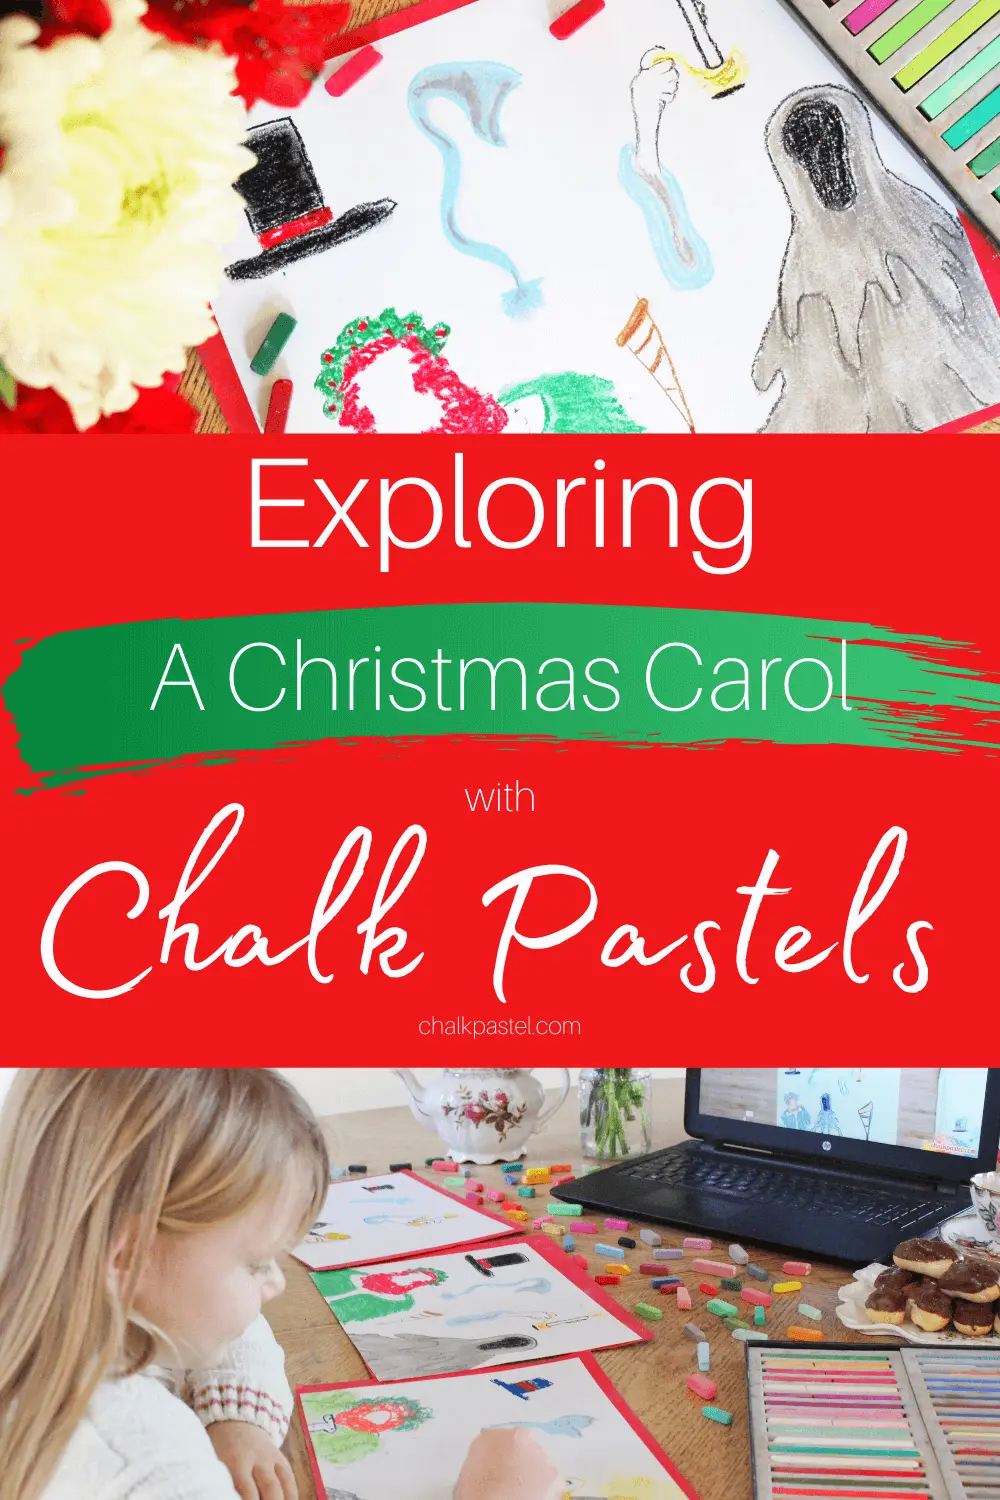 Exploring A Christmas Carol with Chalk Pastels: Exploring A Christmas Carol with chalk pastels is an easy and fun way to combine the rich literature of Charles Dickens, the excitement of cinema, and the glory of art this Christmas season! #AChristmasCarol #CharlesDickens #AChristmasCarolActivities #AChristmasCarolActivitiesforkids #Chalkpastels #ExploringAChristmasCarolwithChalkPastels